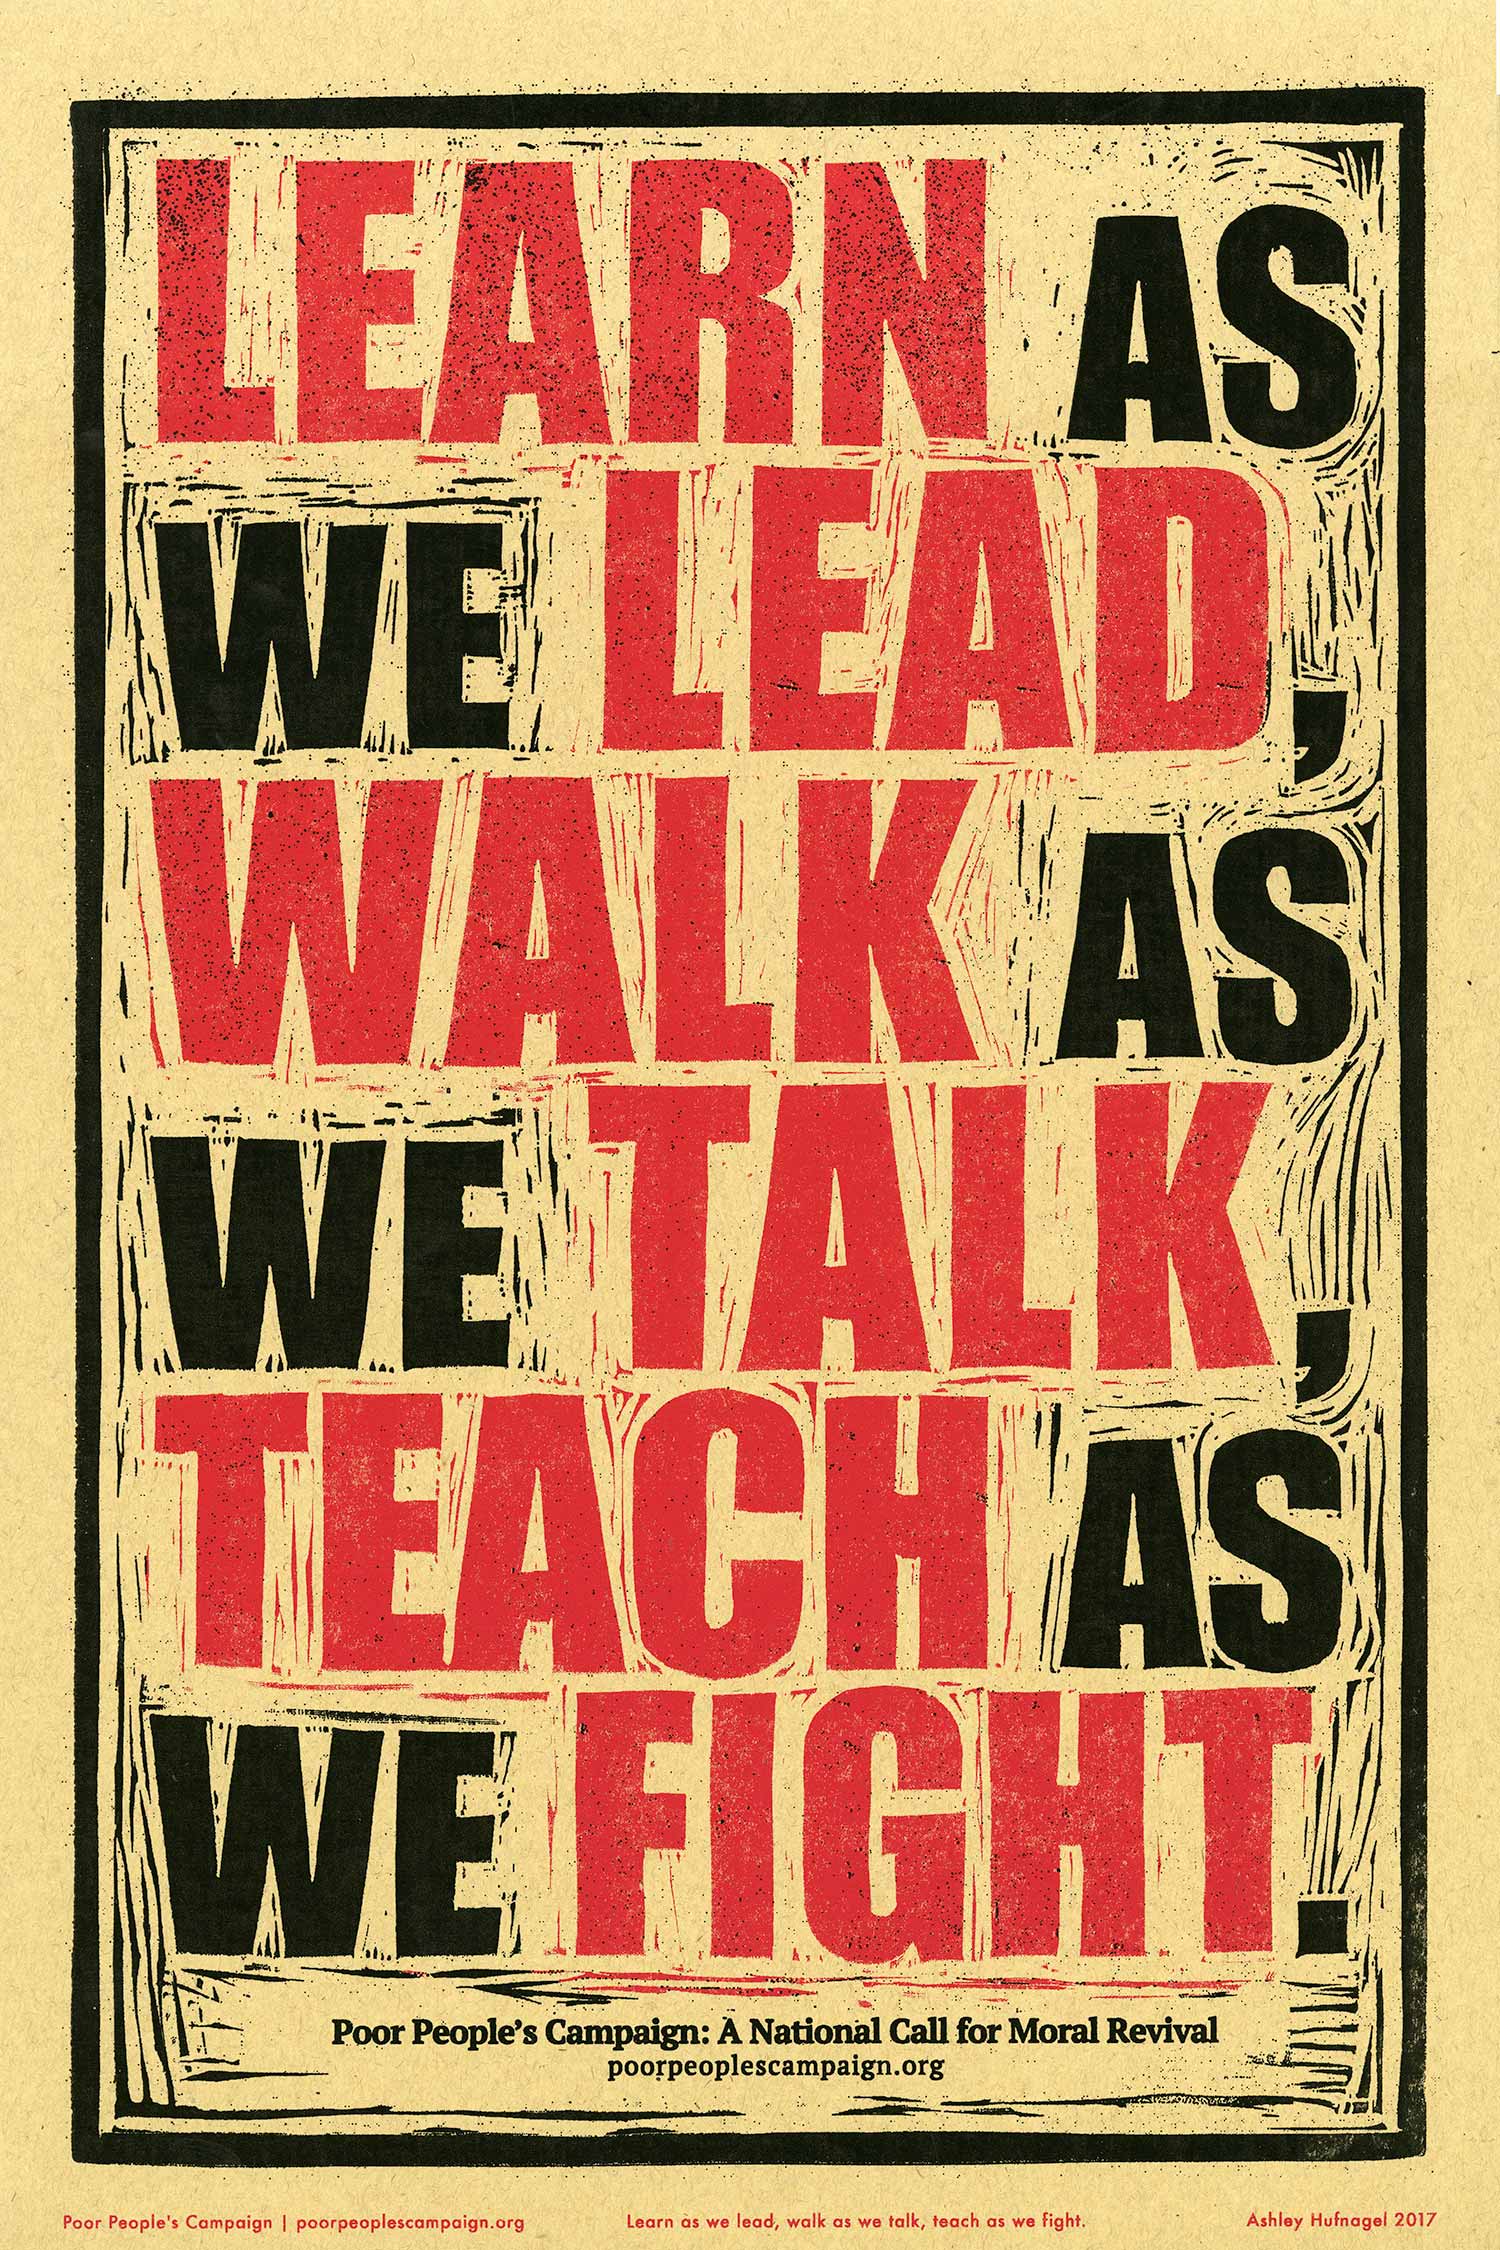 An activist poster with yellow, red, and black. Details in text